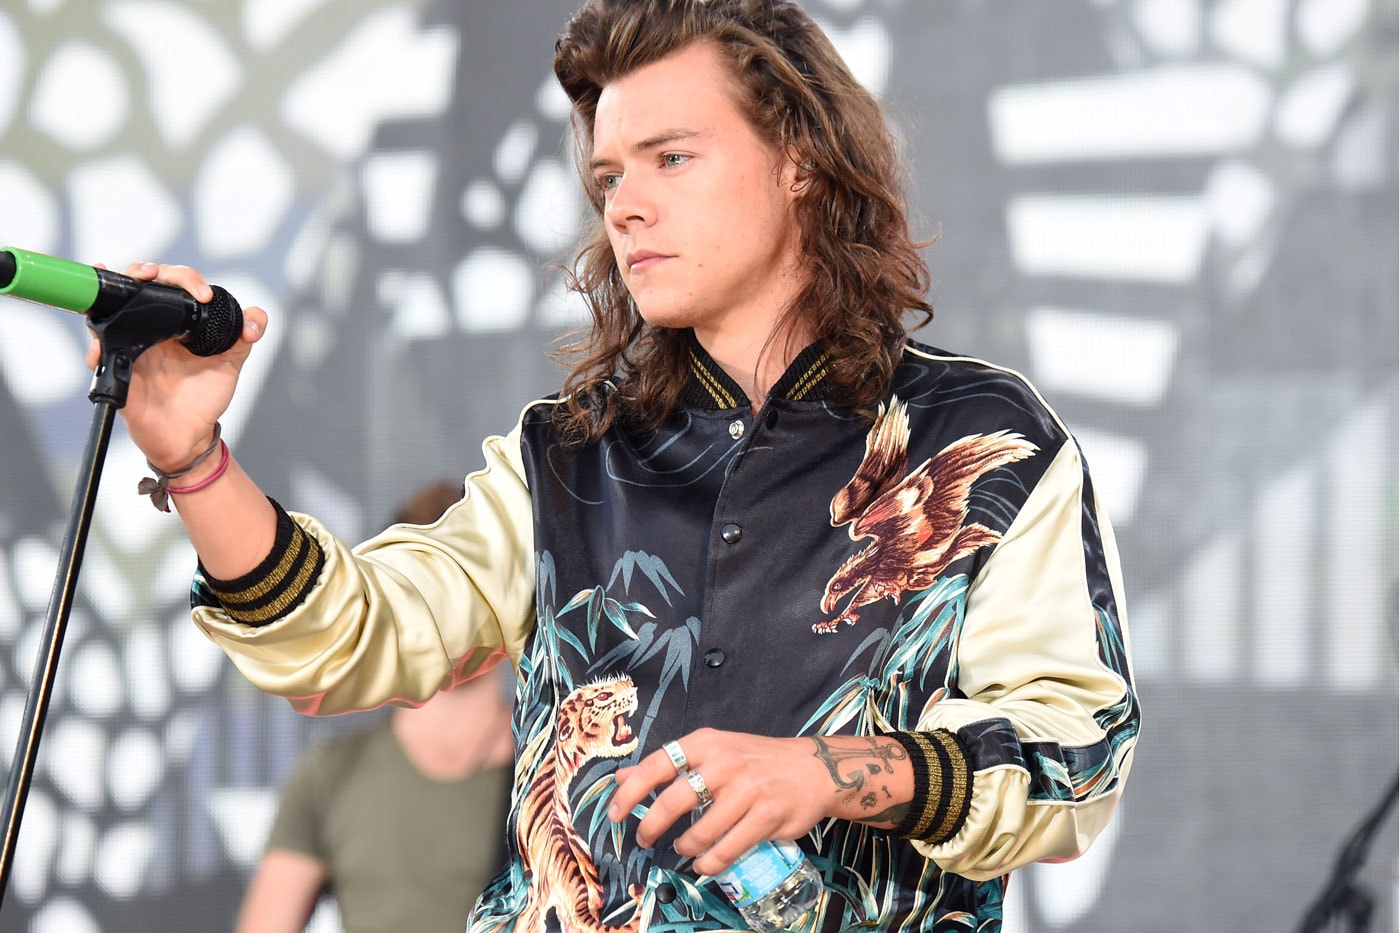 Sony Allegedly Wants to Sign One Direction's Harry Styles to Solo Deal